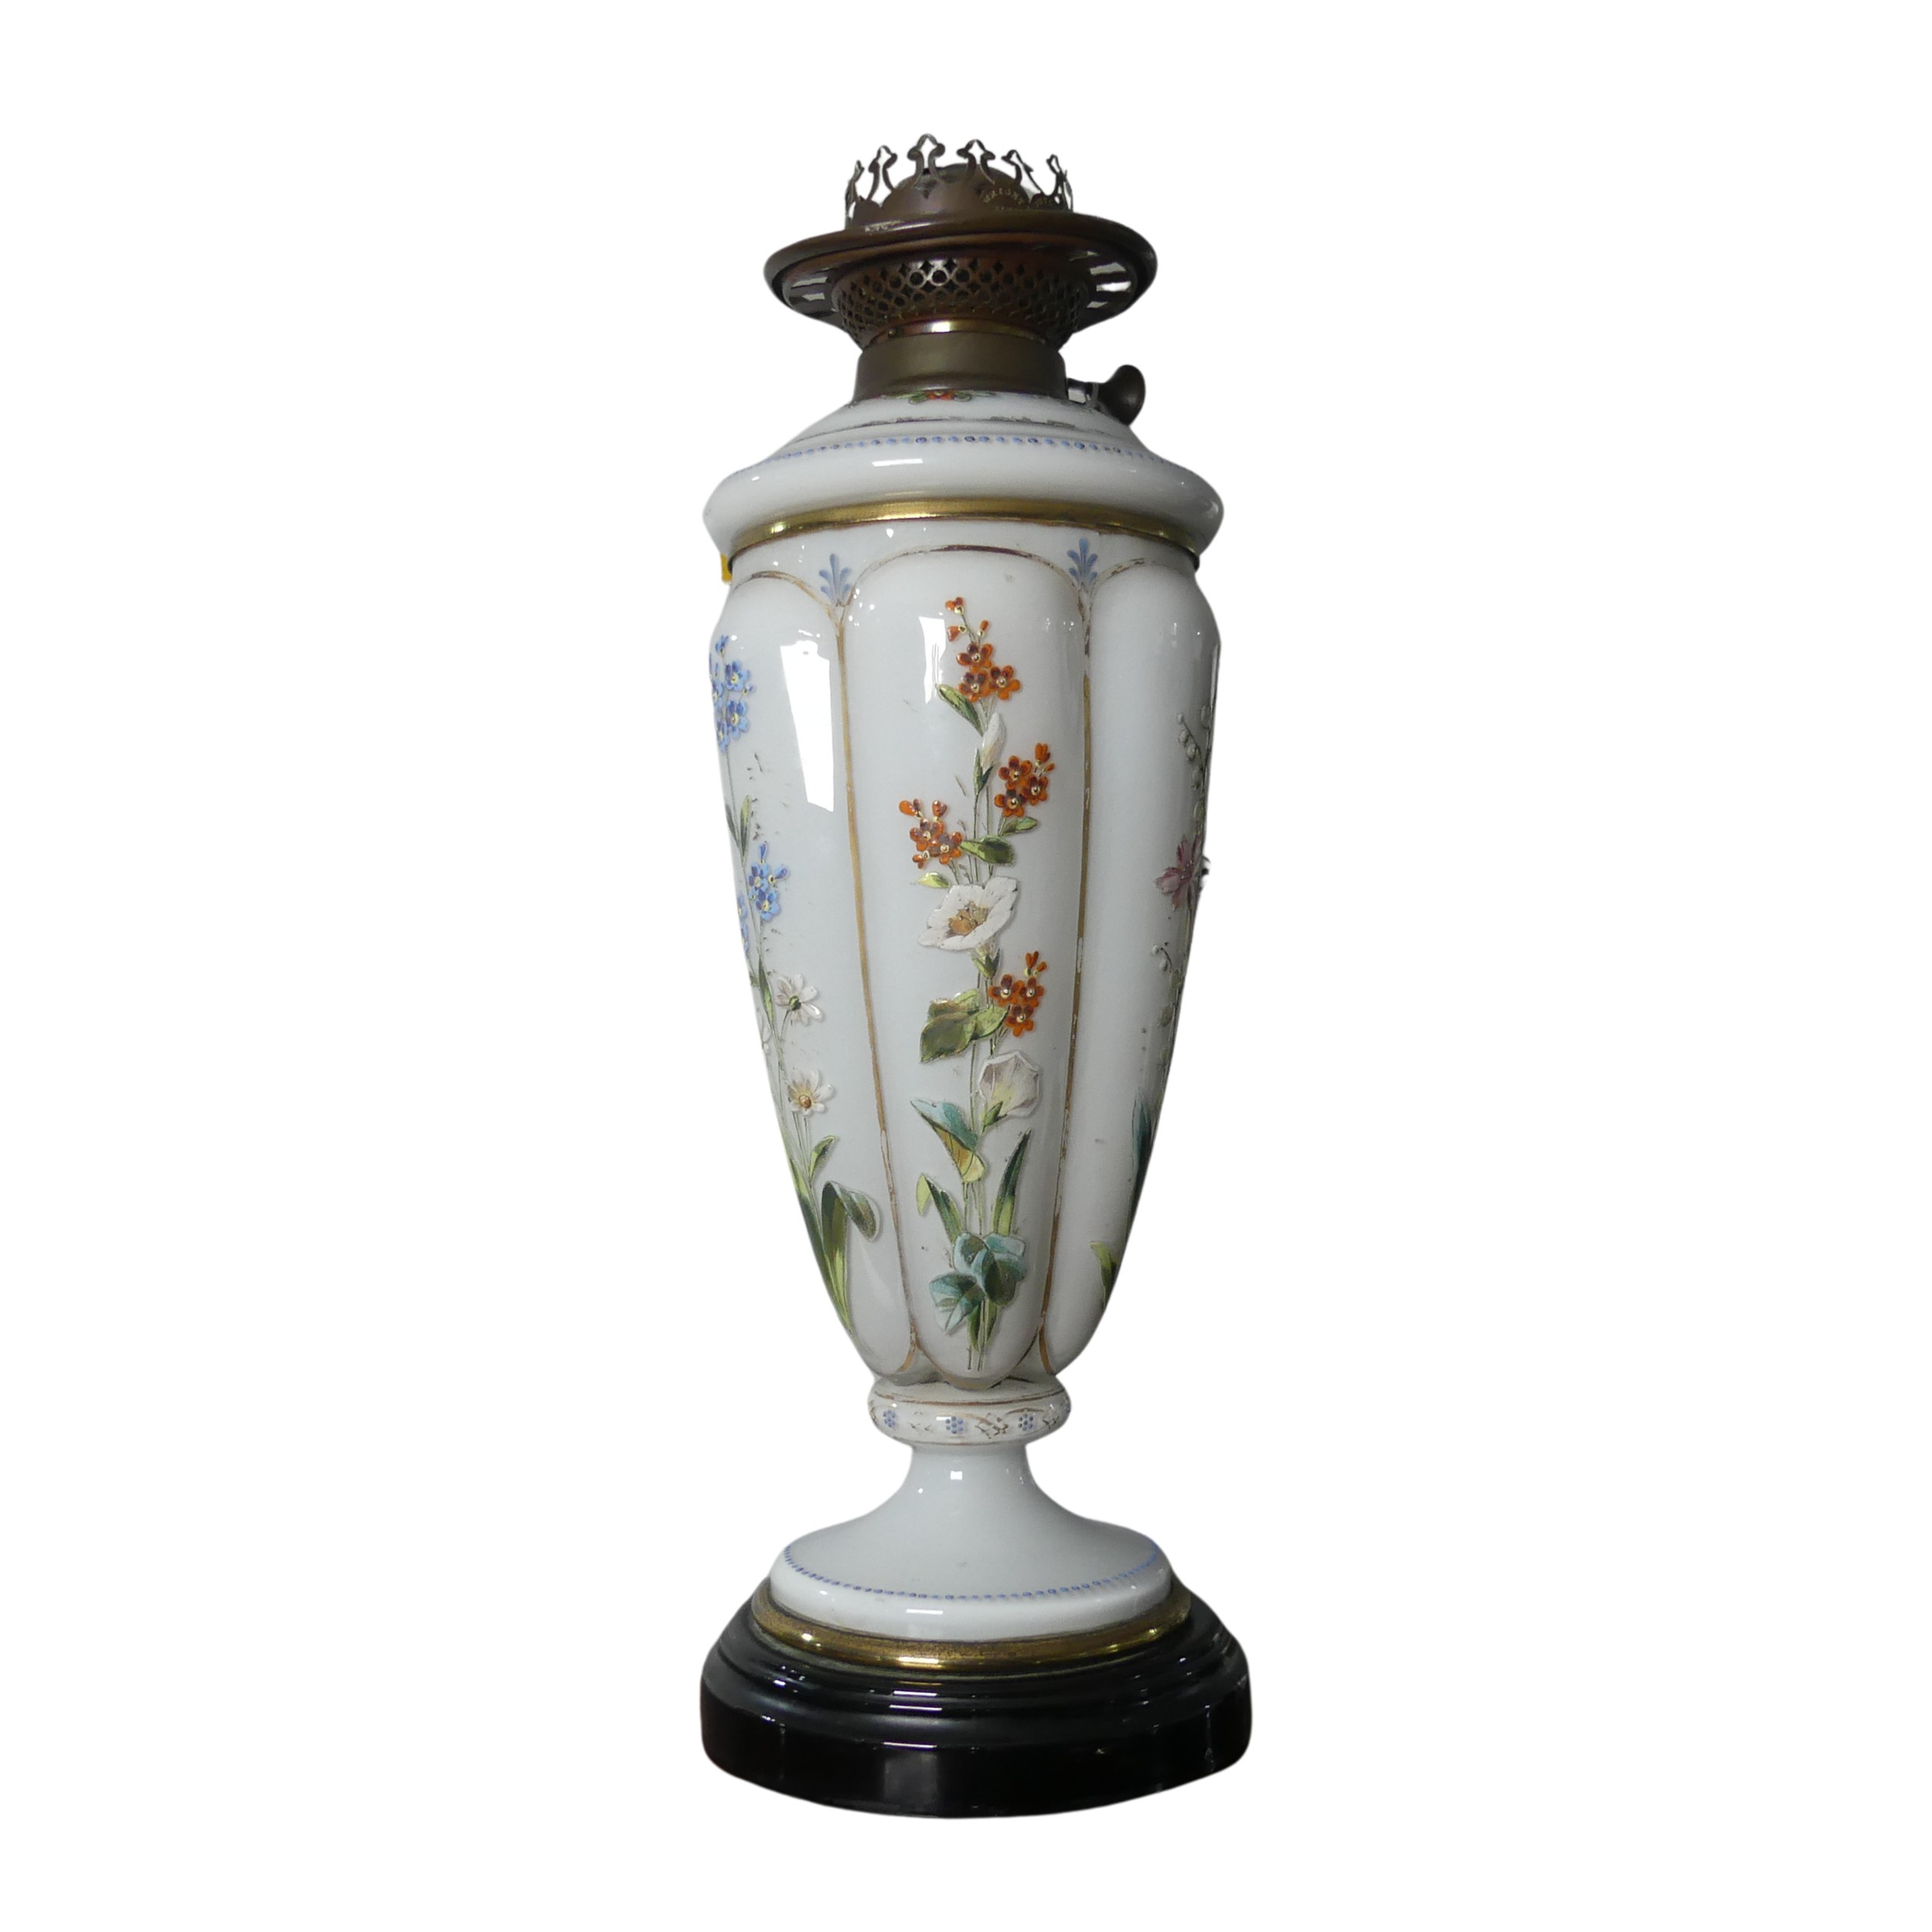 A Victorian opaque and painted glass Oil Lamp, by 'Wright & Butler, Birmingham', burner marked '